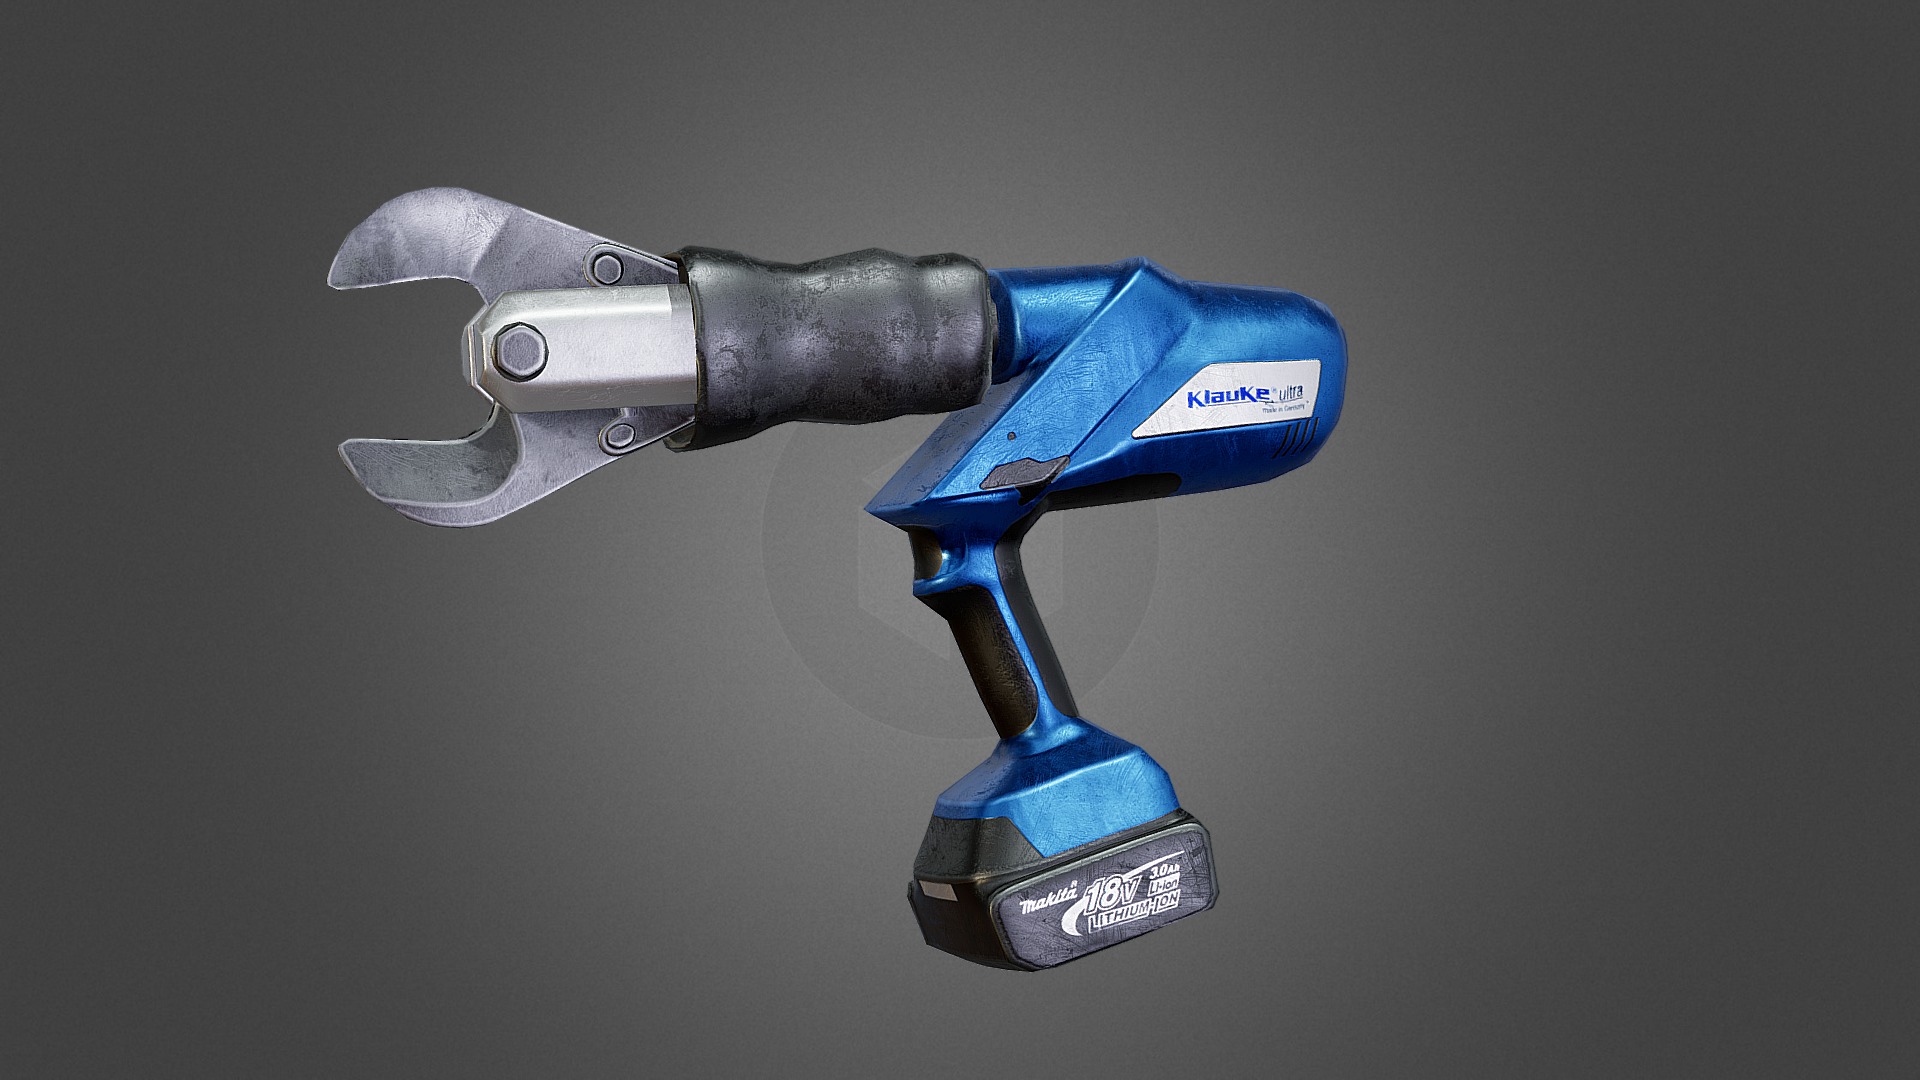 3D model Klauke hydraulic tool ultra - This is a 3D model of the Klauke hydraulic tool ultra. The 3D model is about a blue and white gun.